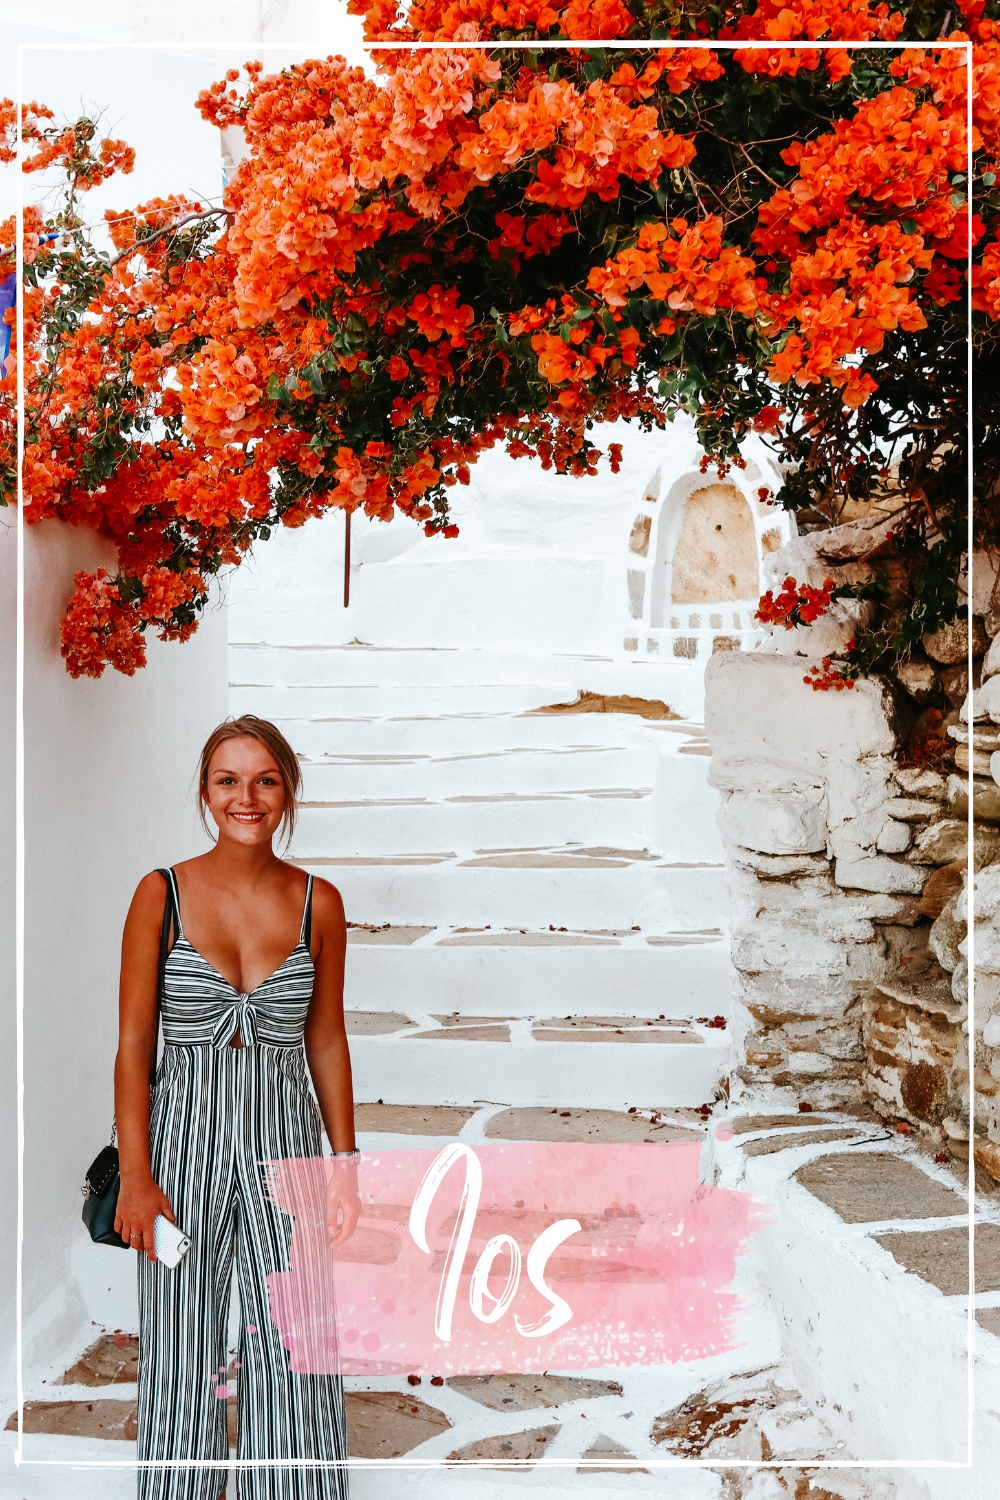 A woman stood in the Chora streets in Ios with flowers in the background. Things to do in Ios. Pinterest link